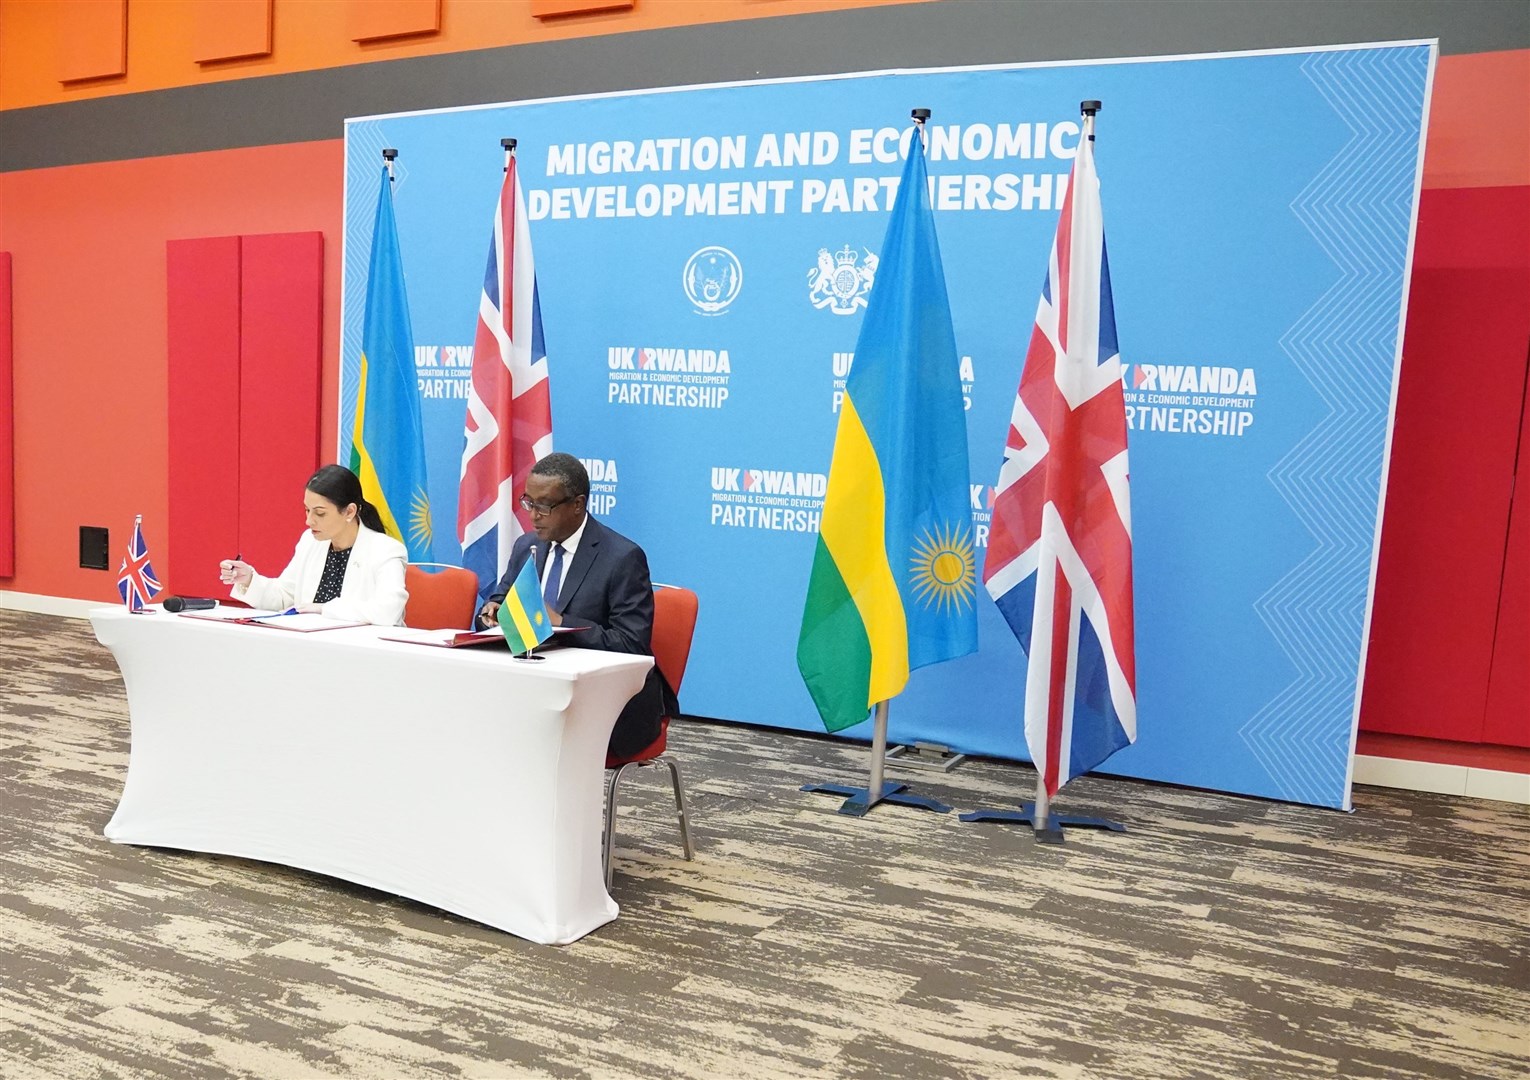 Home Secretary Priti Patel and Rwandan minister for foreign affairs and international co-pperation, Vincent Biruta, signed a “world-first” migration and economic development partnership (Flora Thompson/PA)